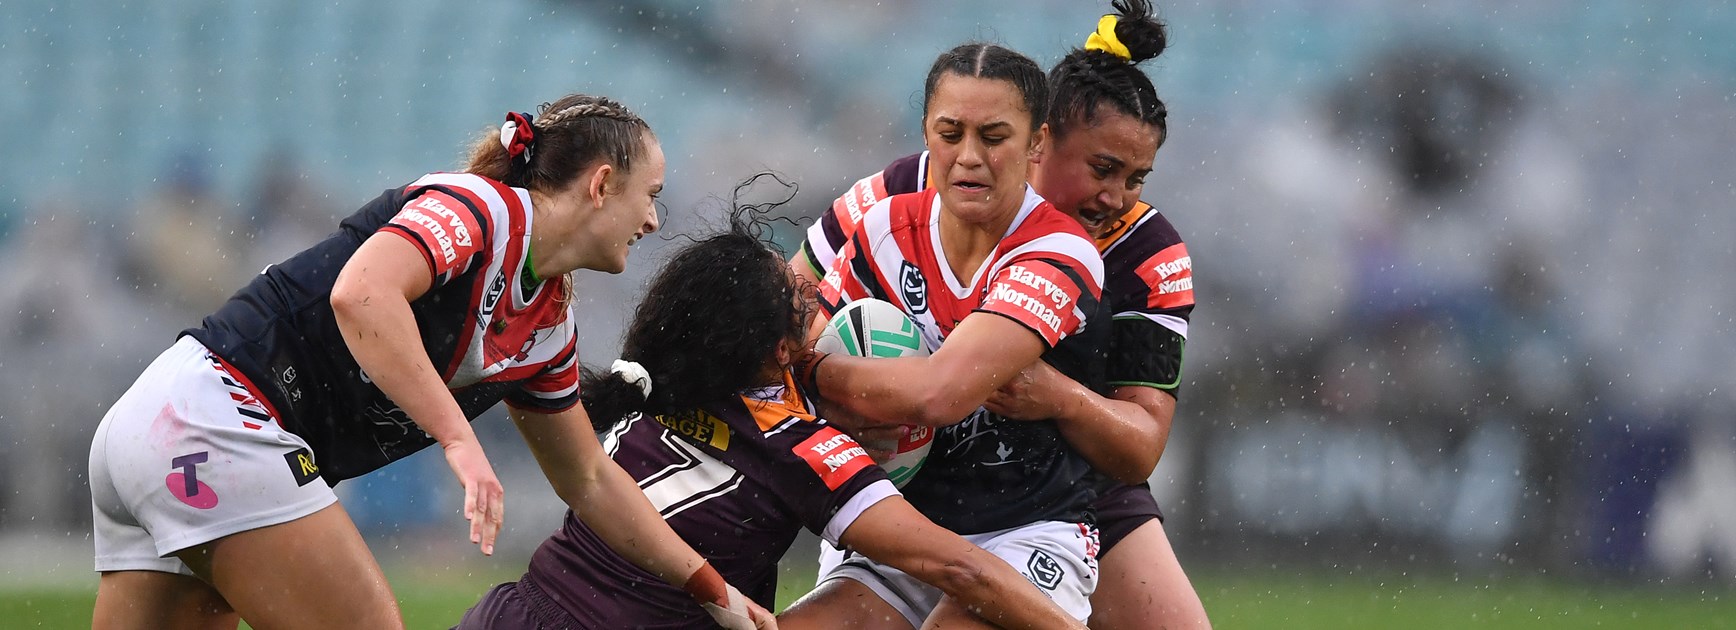 NRLW players set to get 'significant' pay increase in 2022: Abdo